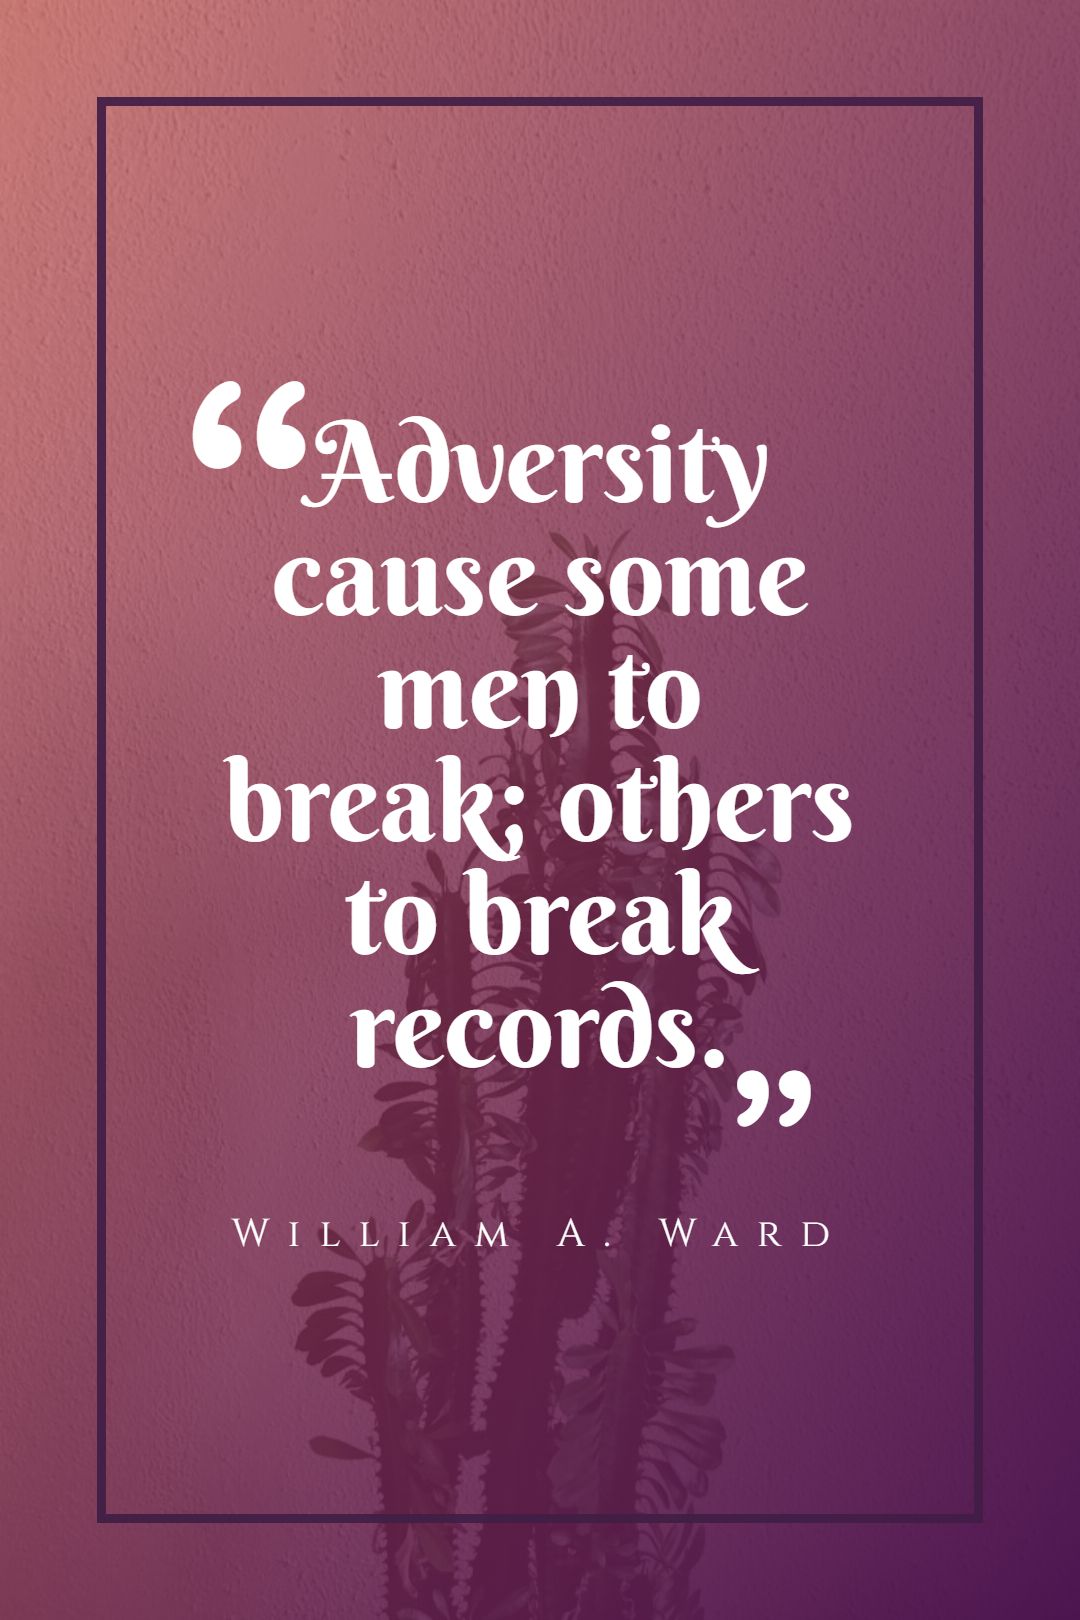 Adversity cause some men to break others to break records.